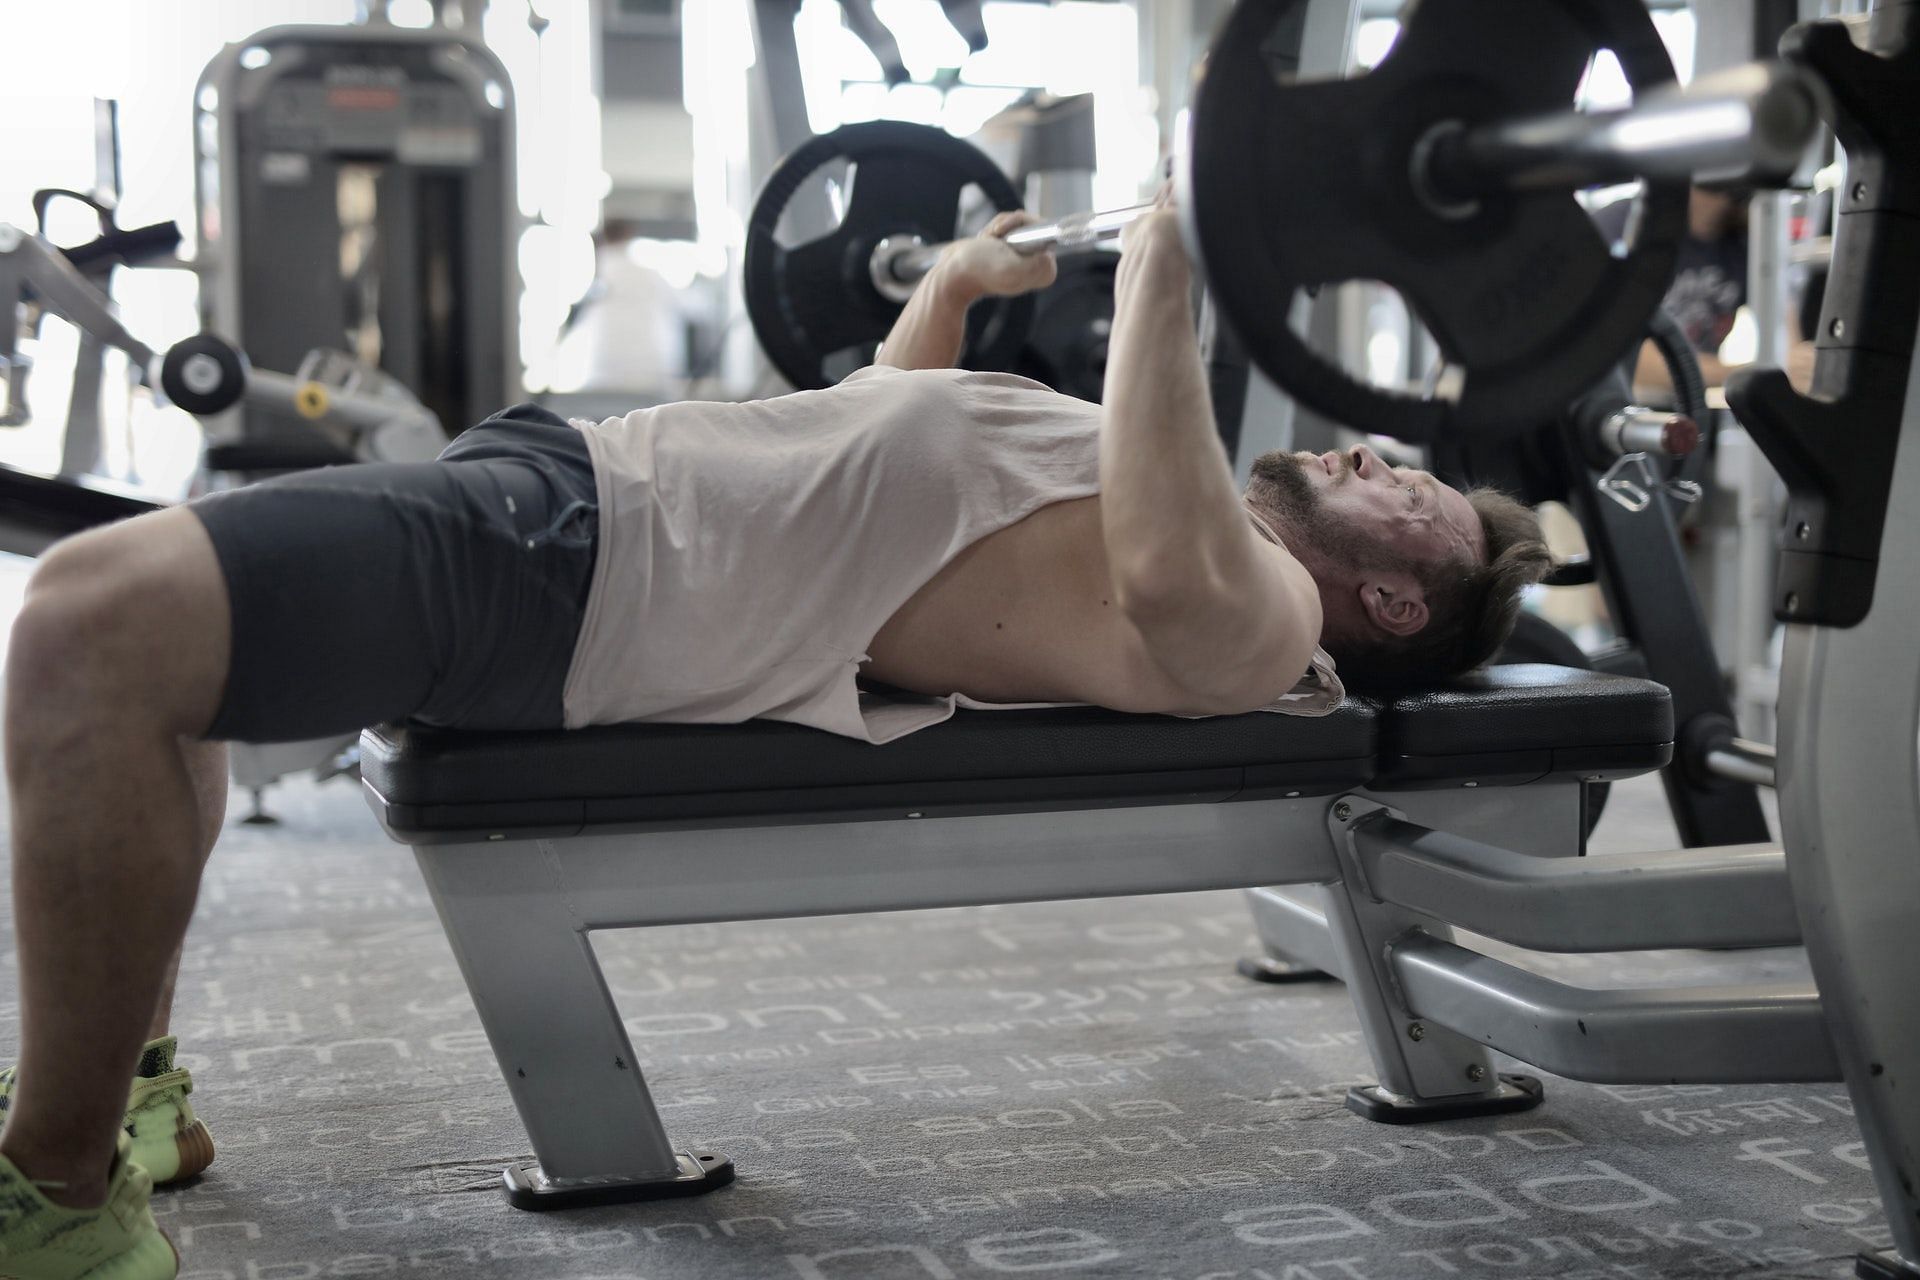 Is there such a thing called too much weight training? (Image via Pexels/Photo by Andrea Piacquadio)